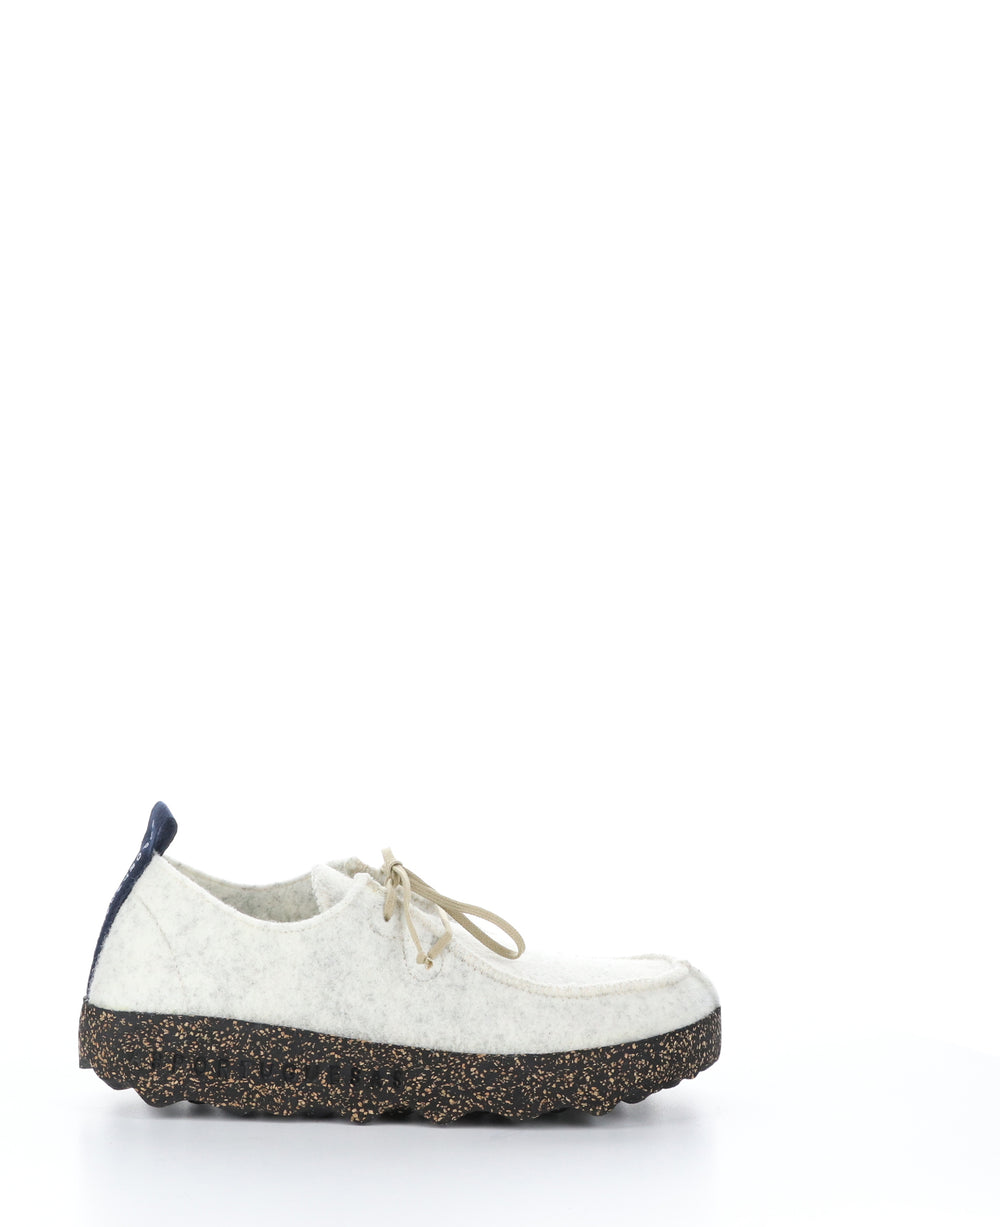 CHAT063ASP Off White Round Toe Shoes|CHAT063ASP Chaussures à Bout Rond in Blanc